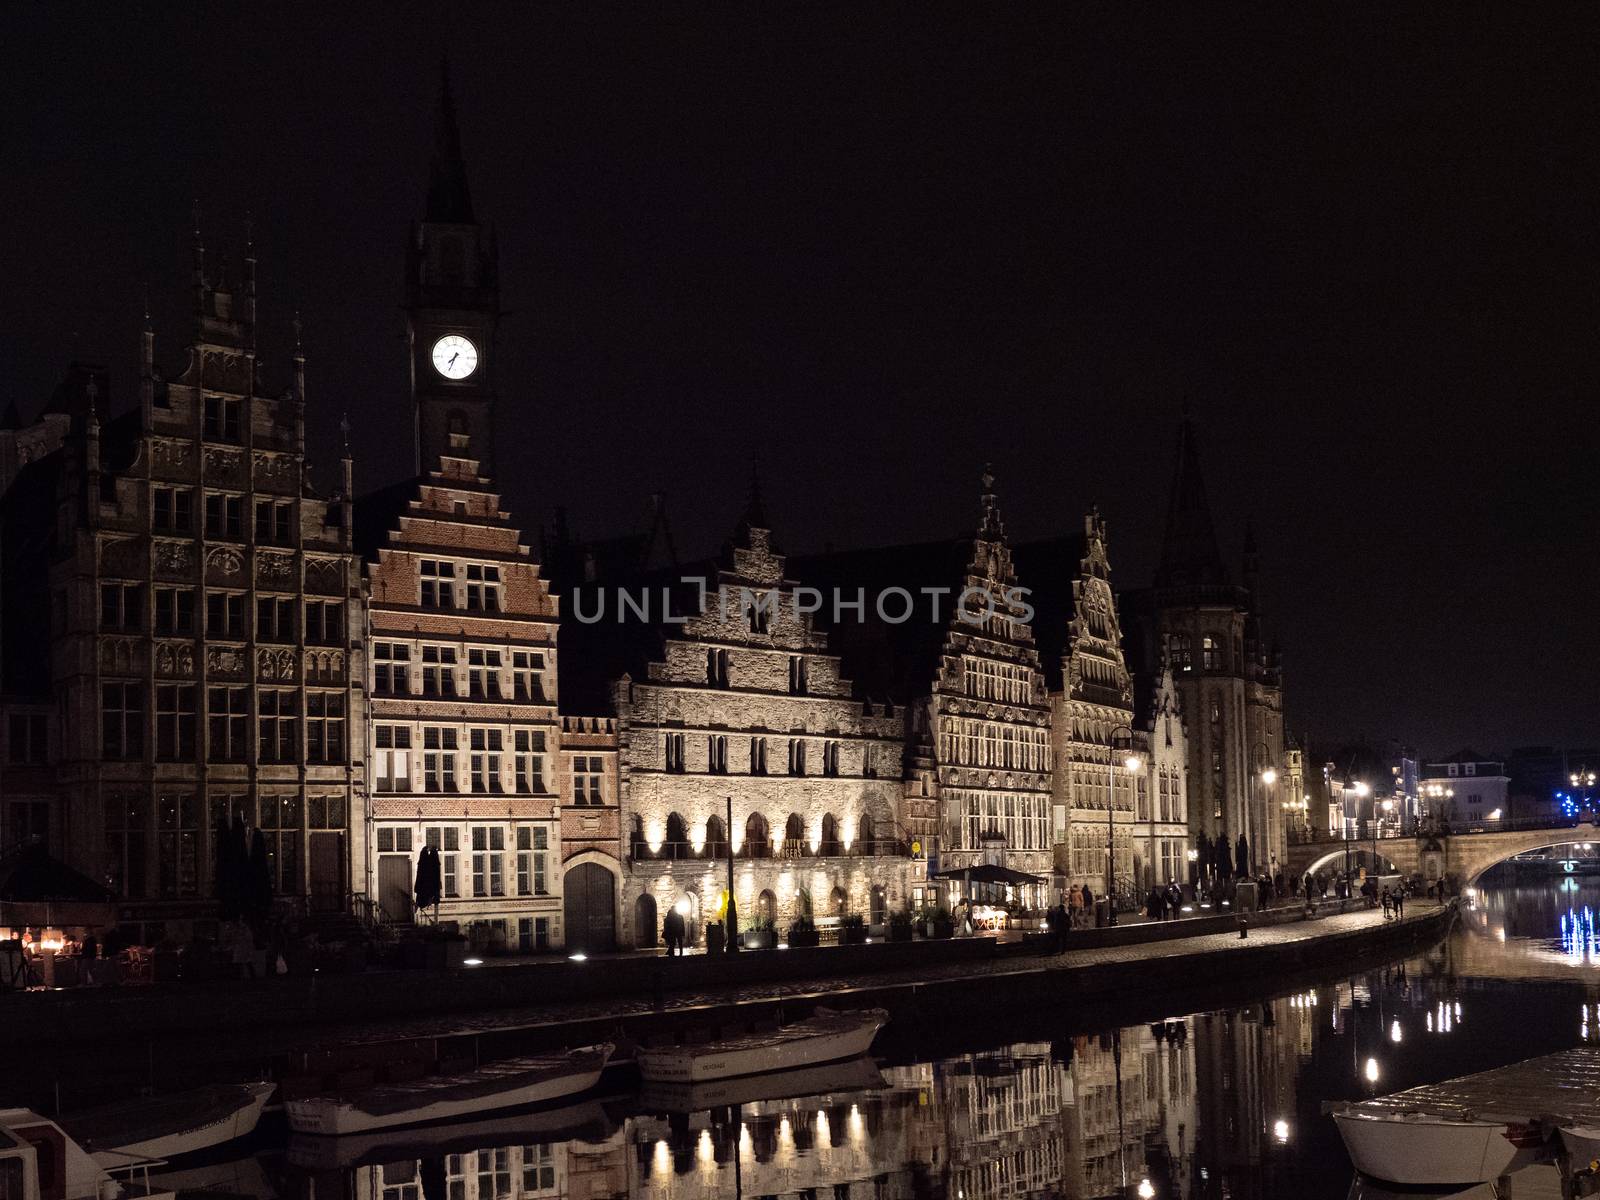 guild houses of Ghent by the canal by jmagfoto